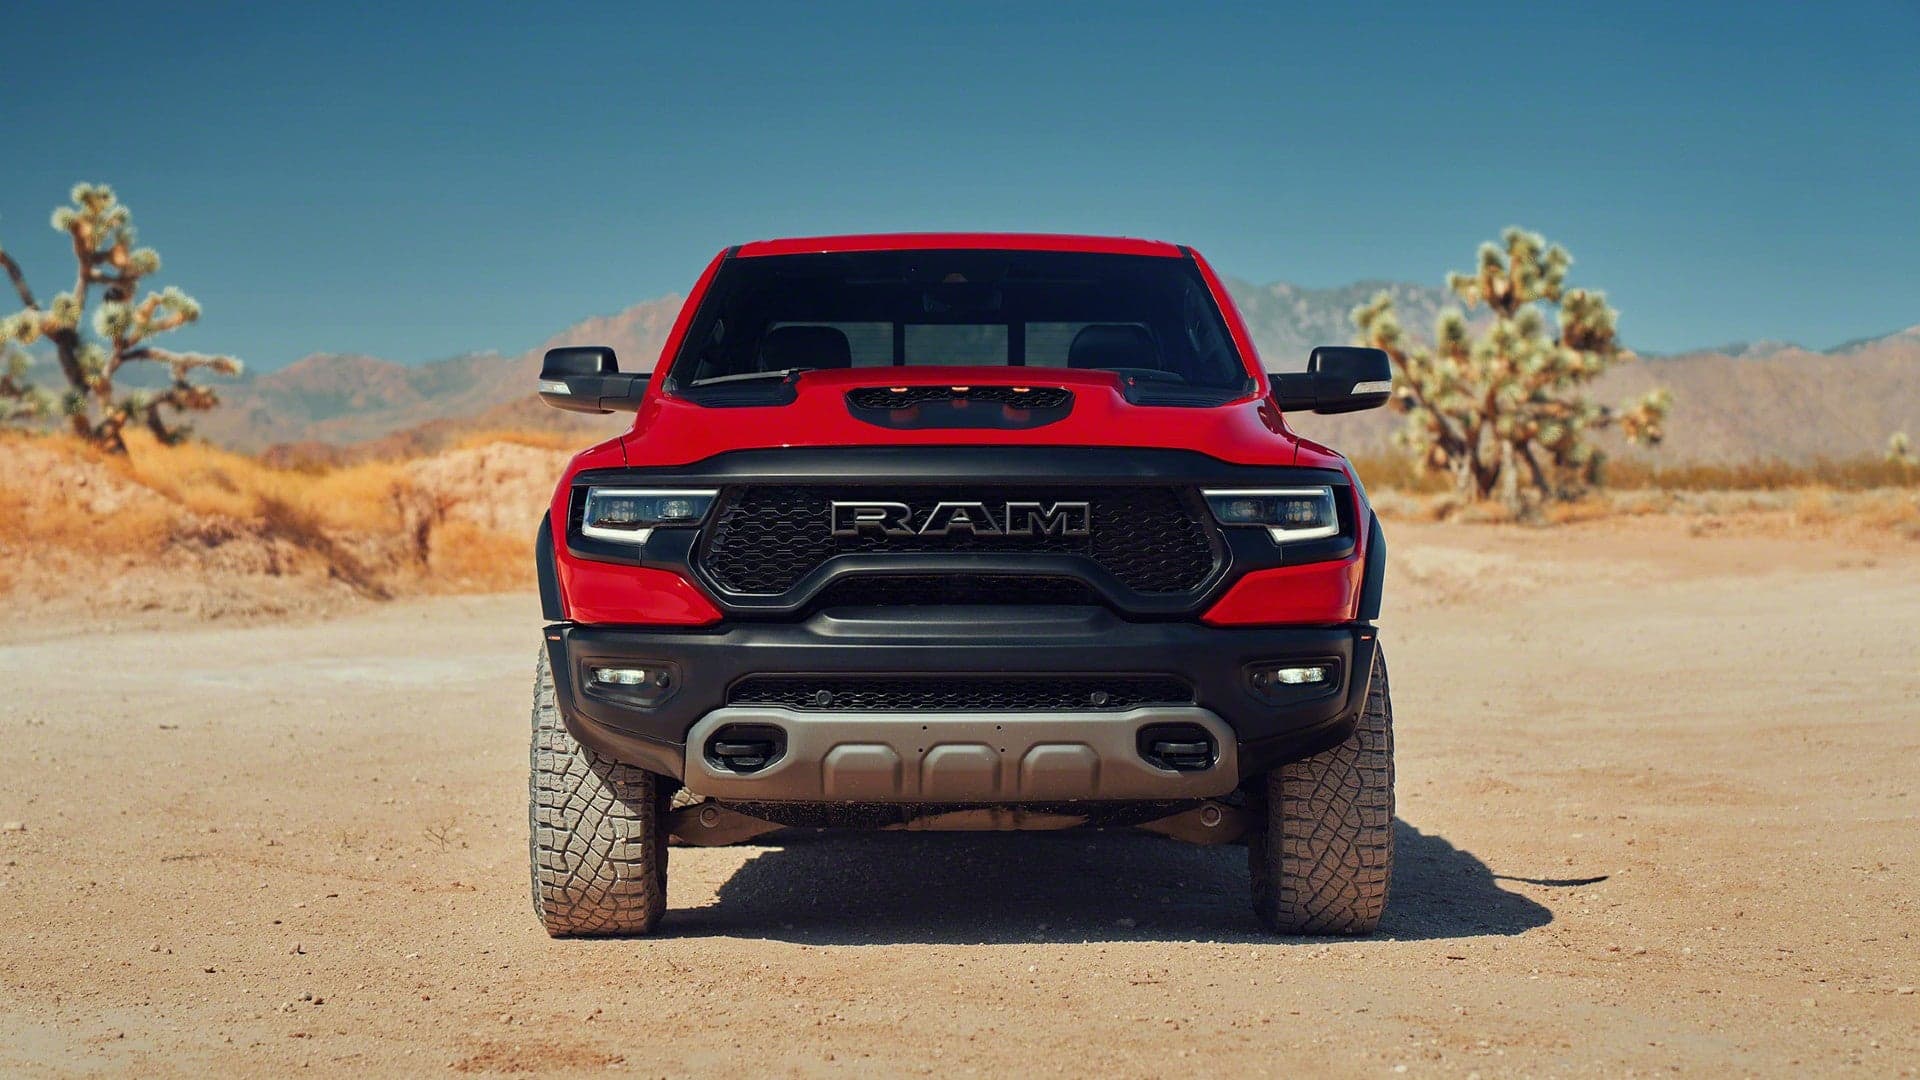 2021 Ram TRX Is the First Factory Supercharged Truck Since the Ford SVT Lightning